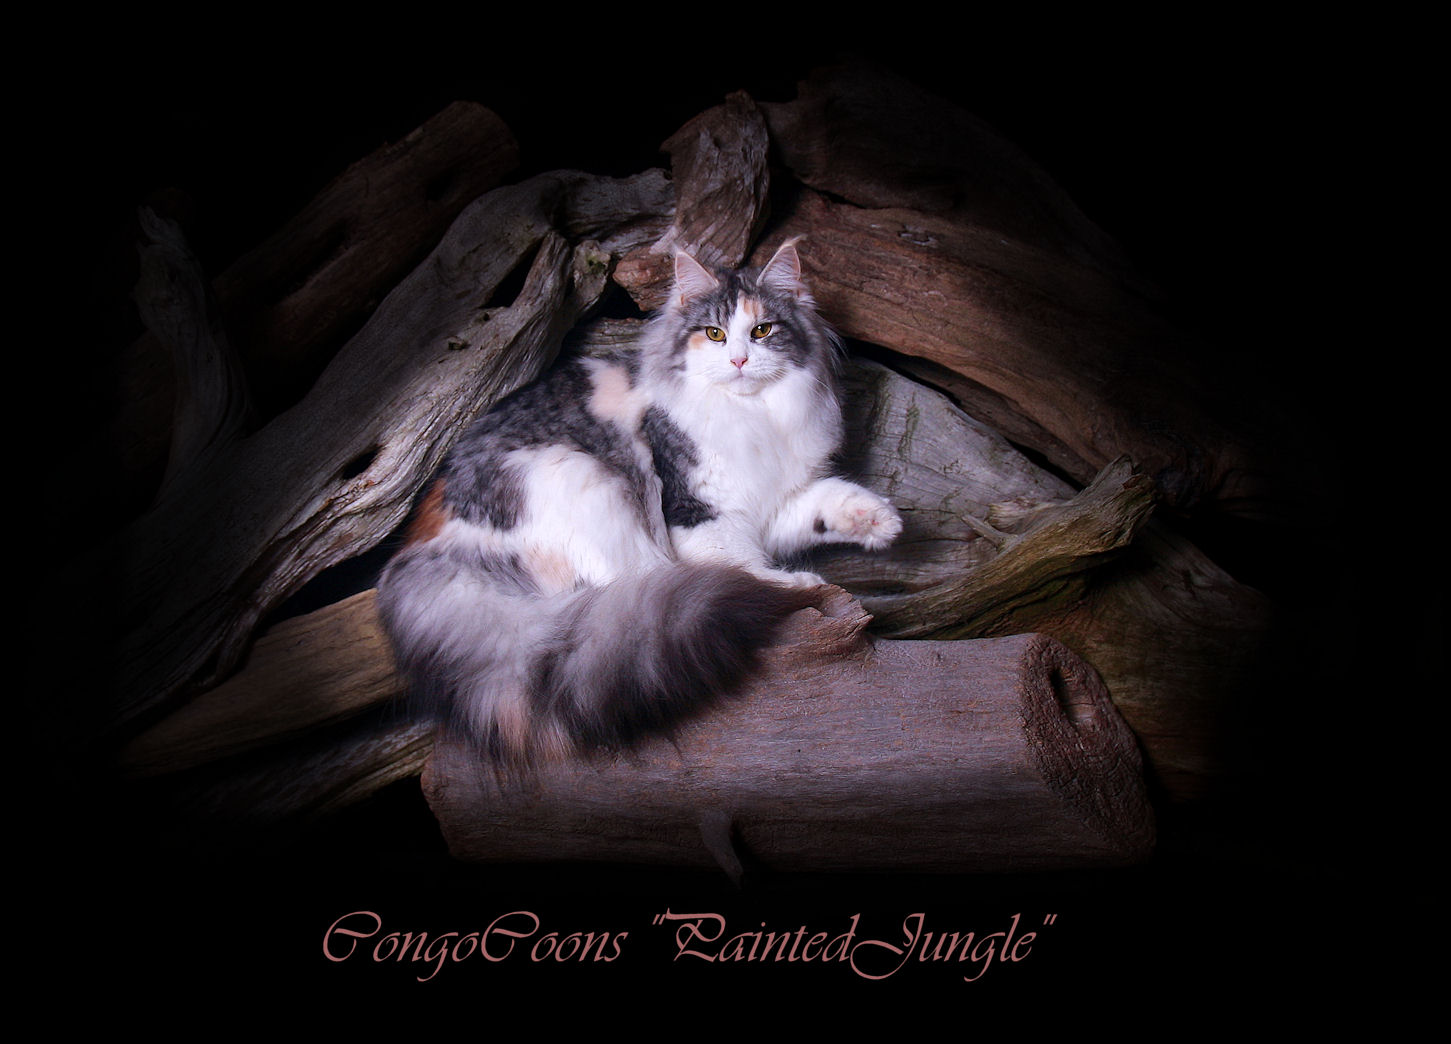 image of a striking colored maine coon cat